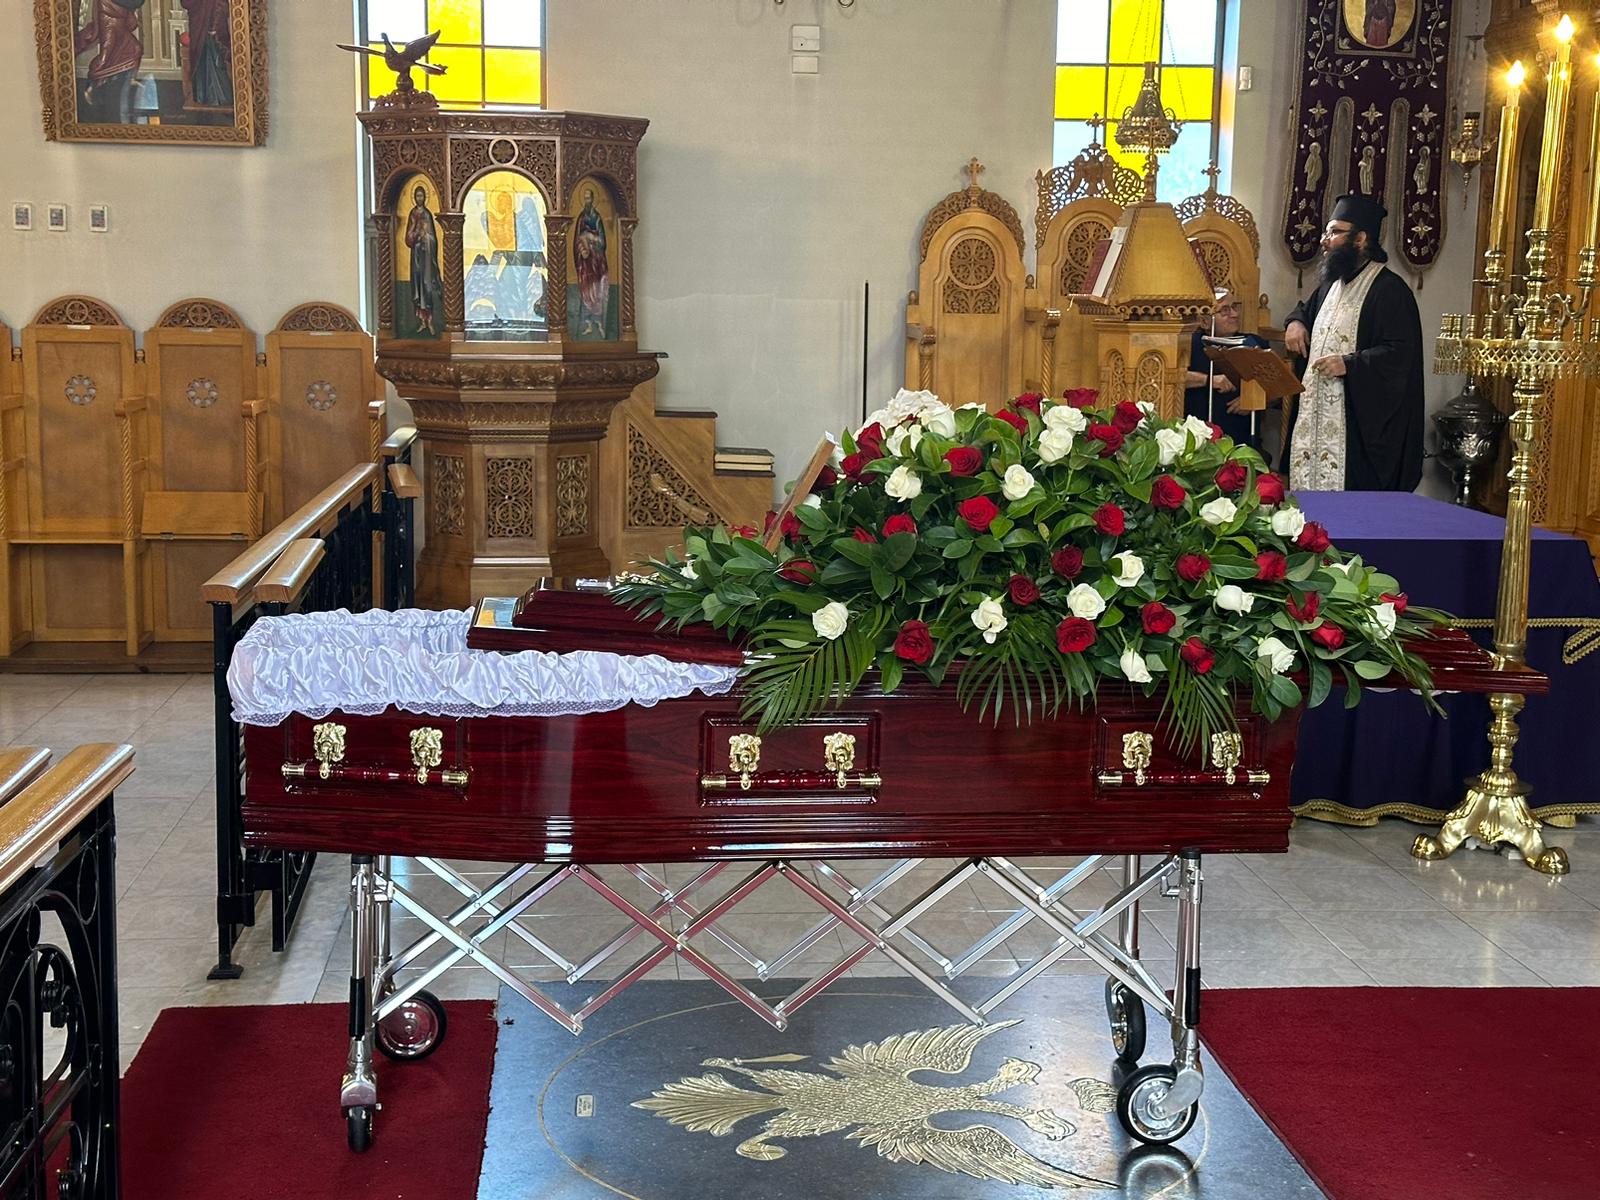 Close-up view of a decorated coffin inside a Greek Orthodox church in Sydney